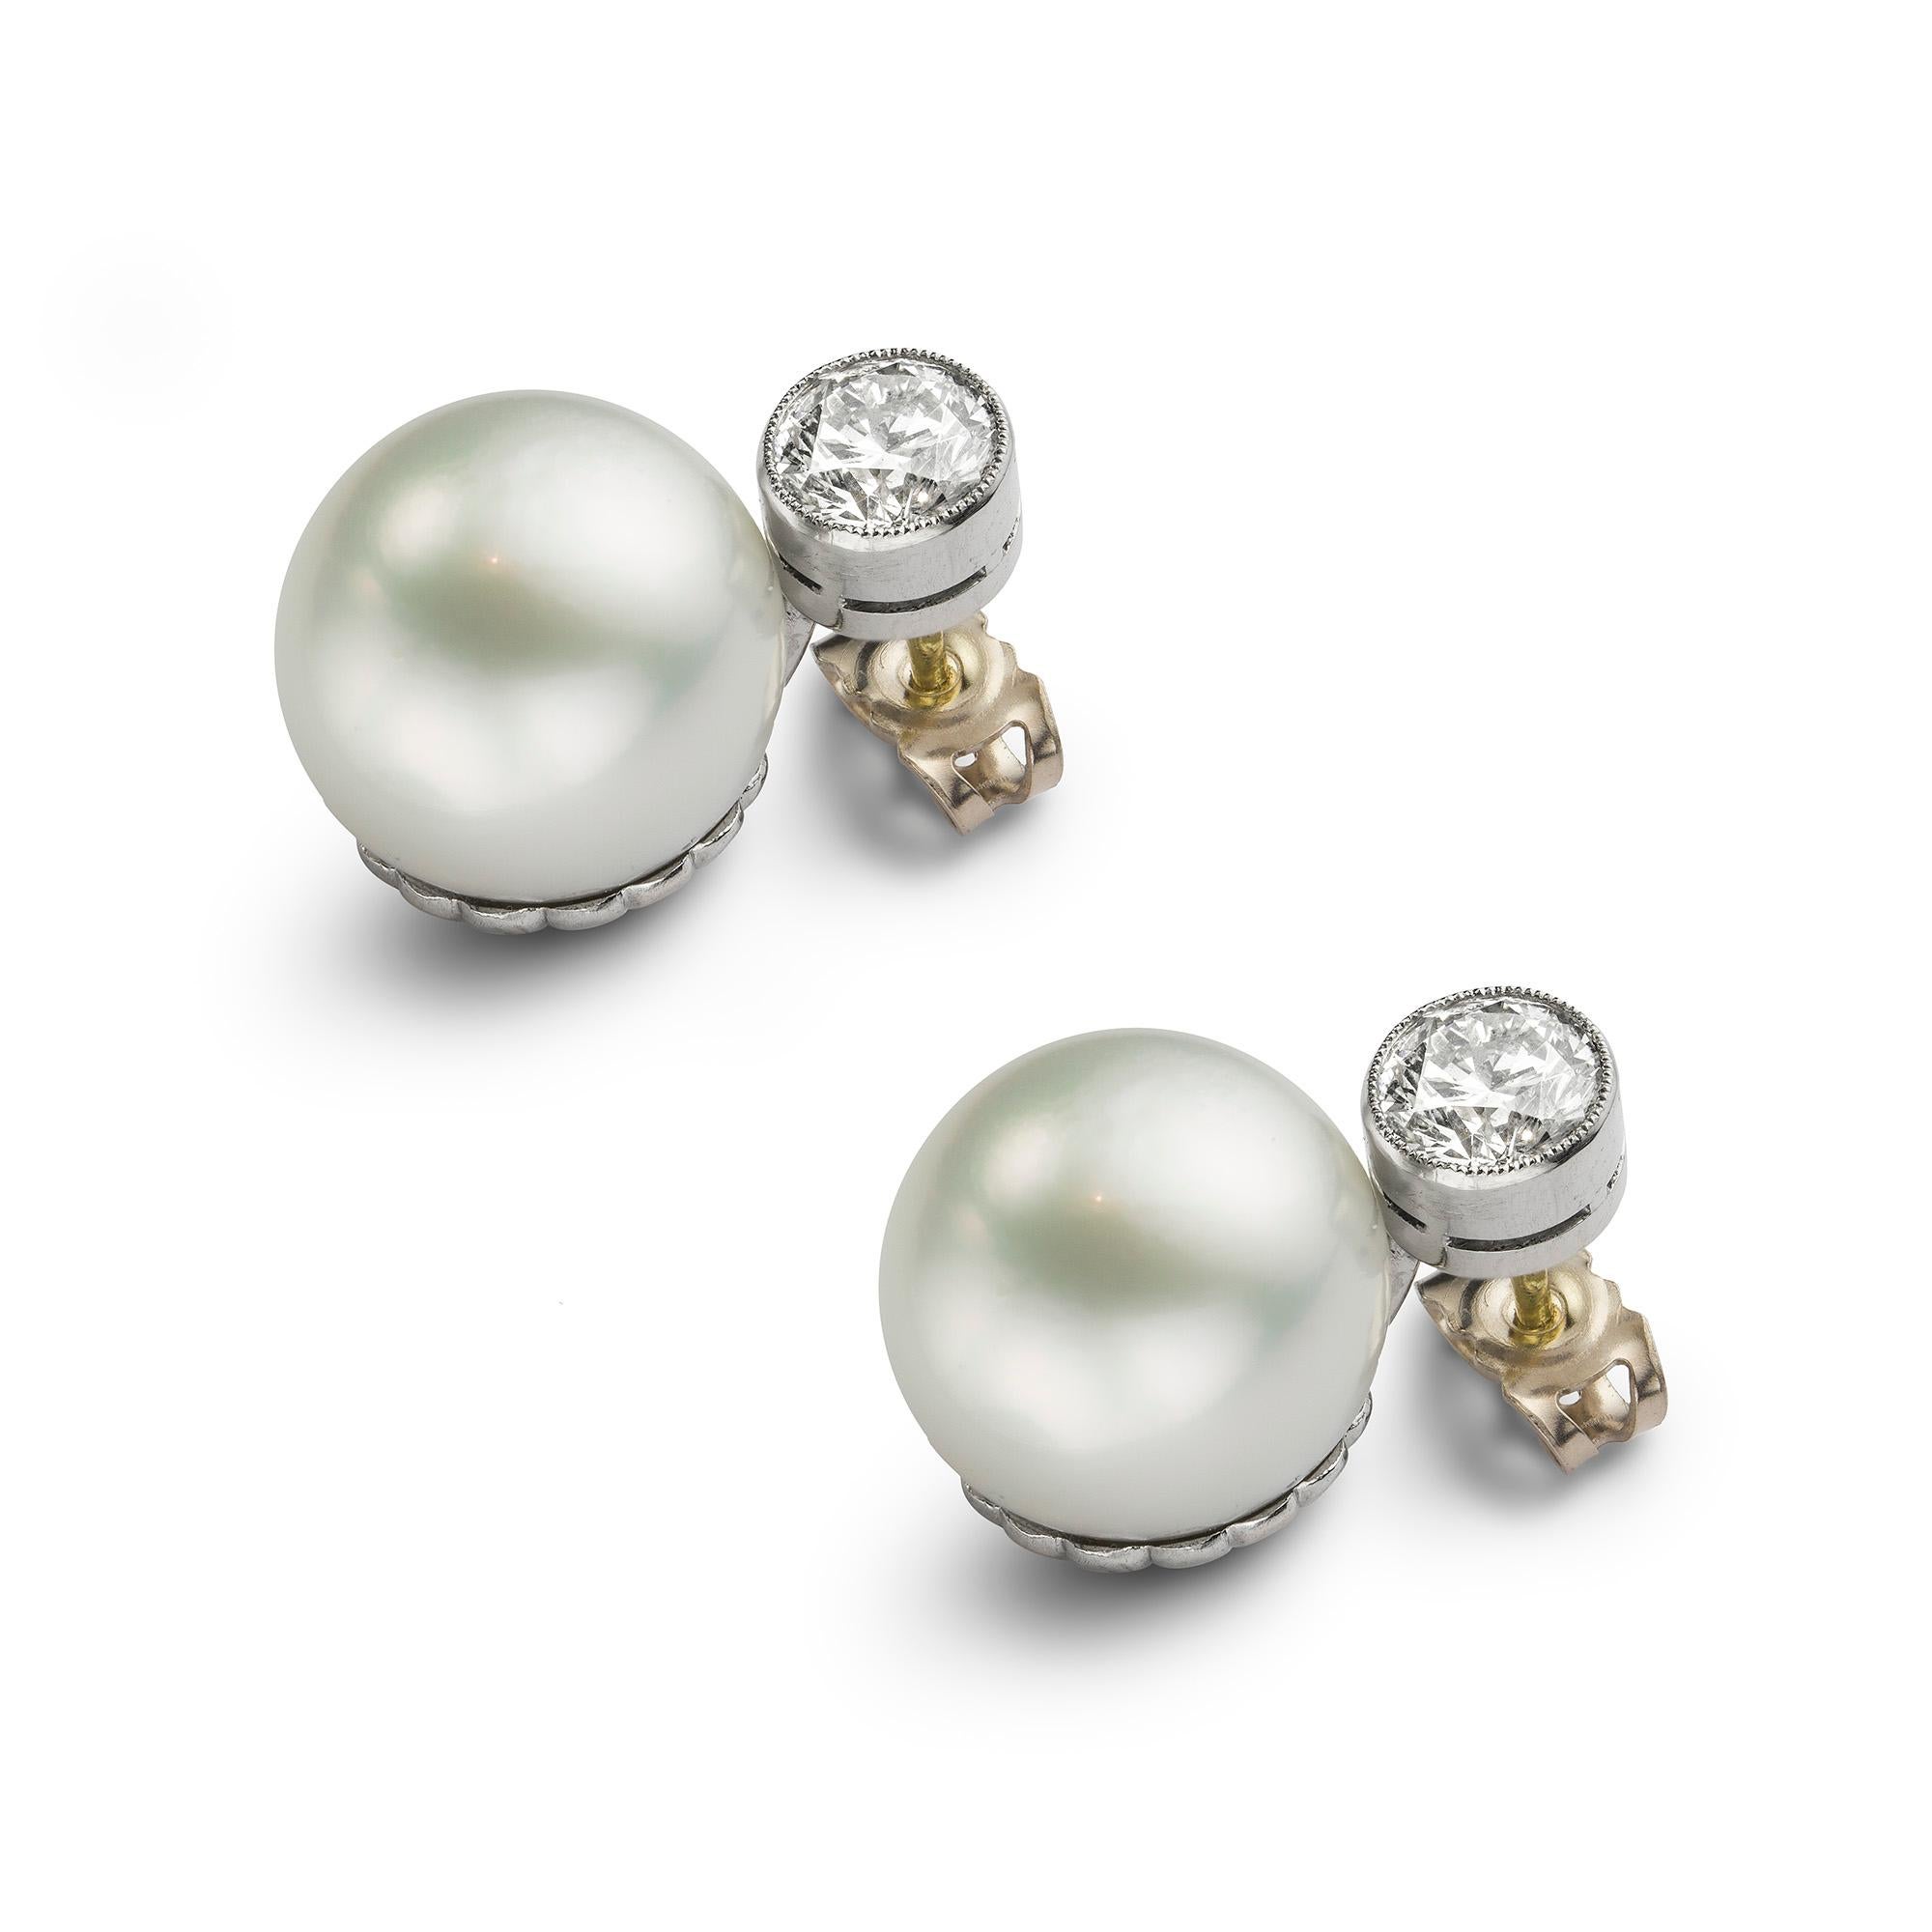 A pair of South Sea cultured pearl and diamond earrings, each earring with a single old brilliangt-cut diamond top, the one diamond weighing 0.90 carats and the other 0.91 carats, assessed to be of I-J colour and SI2-I1 clarity, each millegrain-set